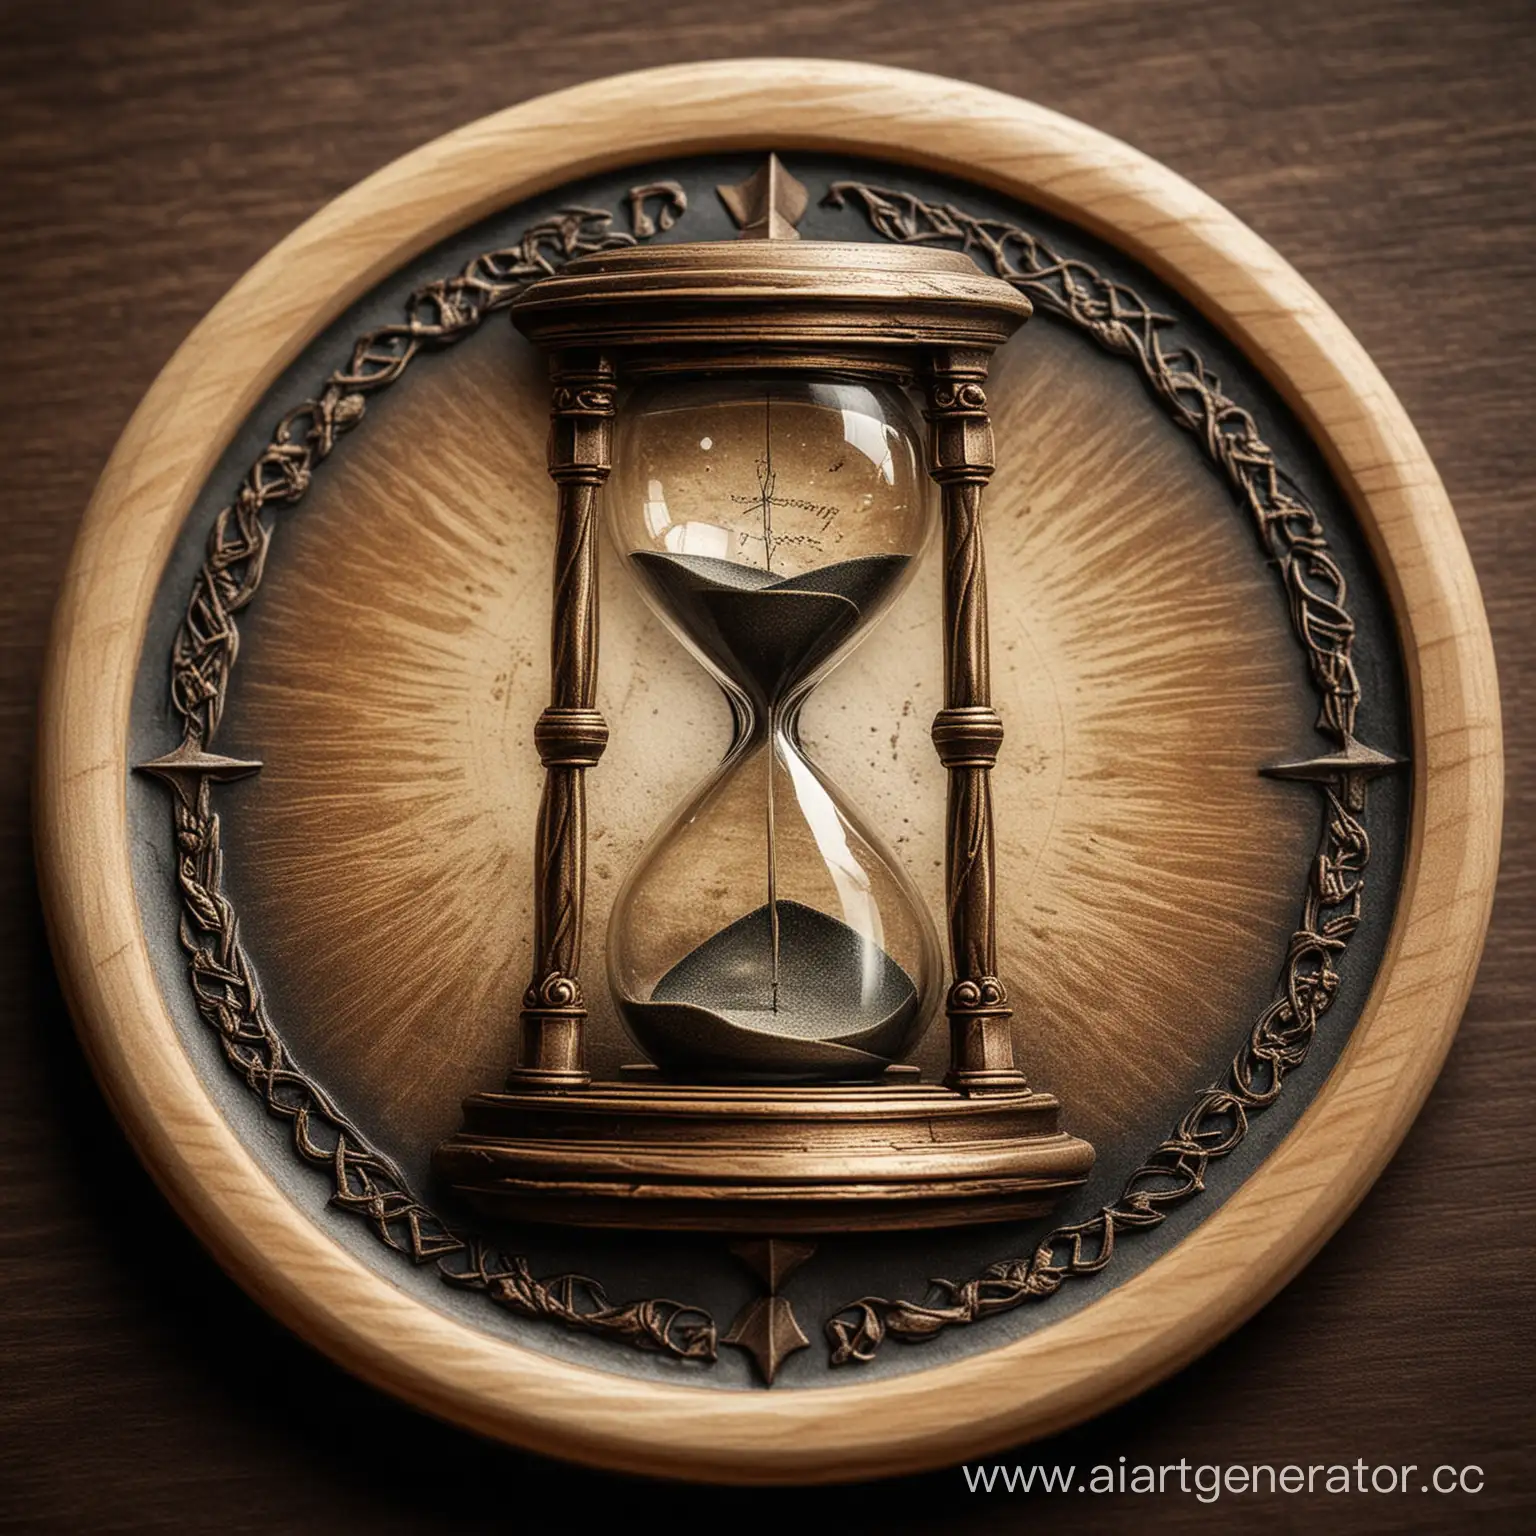 Intricate-Engraved-Hourglass-Emblem-Ancient-Symbol-of-Time